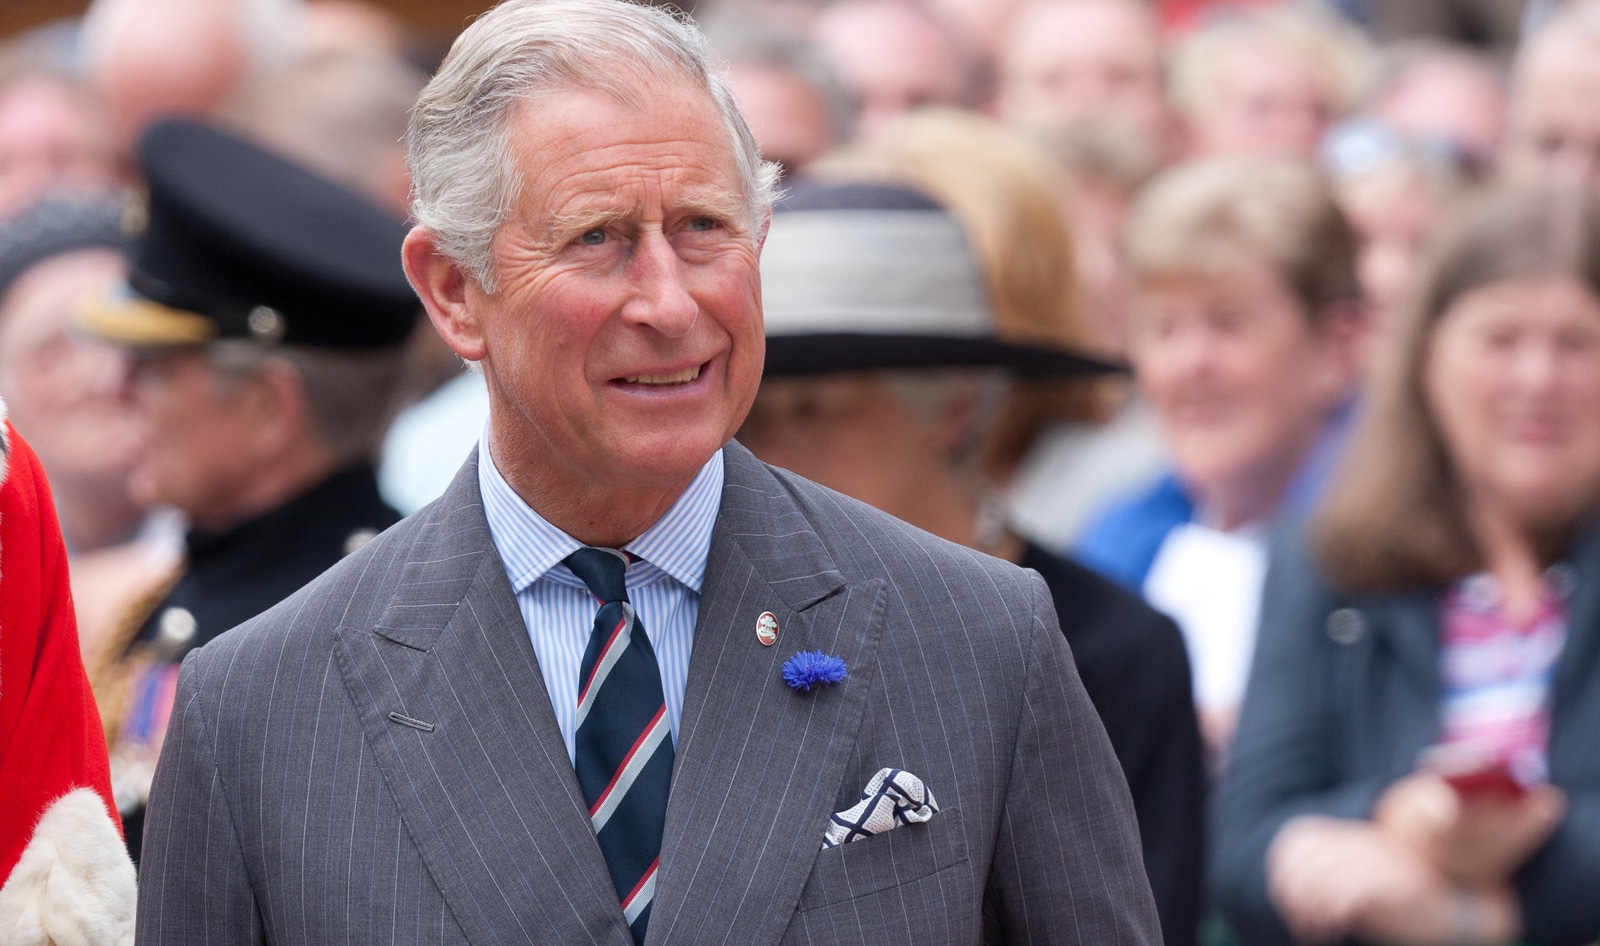 Prince Charles Goes Meatless 2 Days Per Week to Fight Climate Change